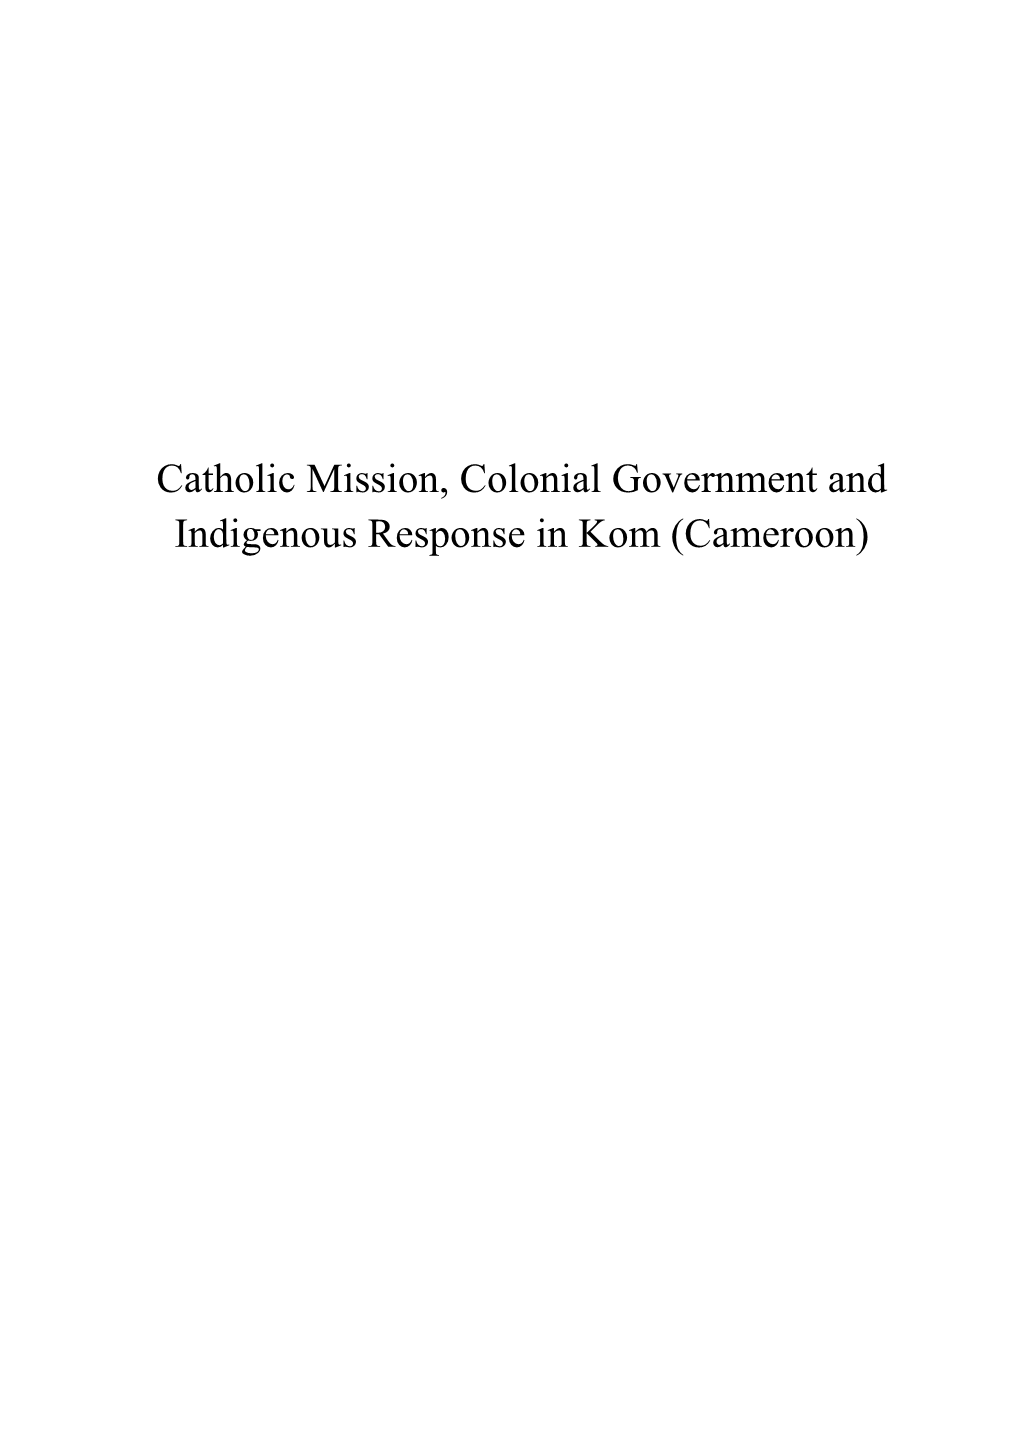 Catholic Mission, Colonial Government and Indigenous Response in Kom (Cameroon)